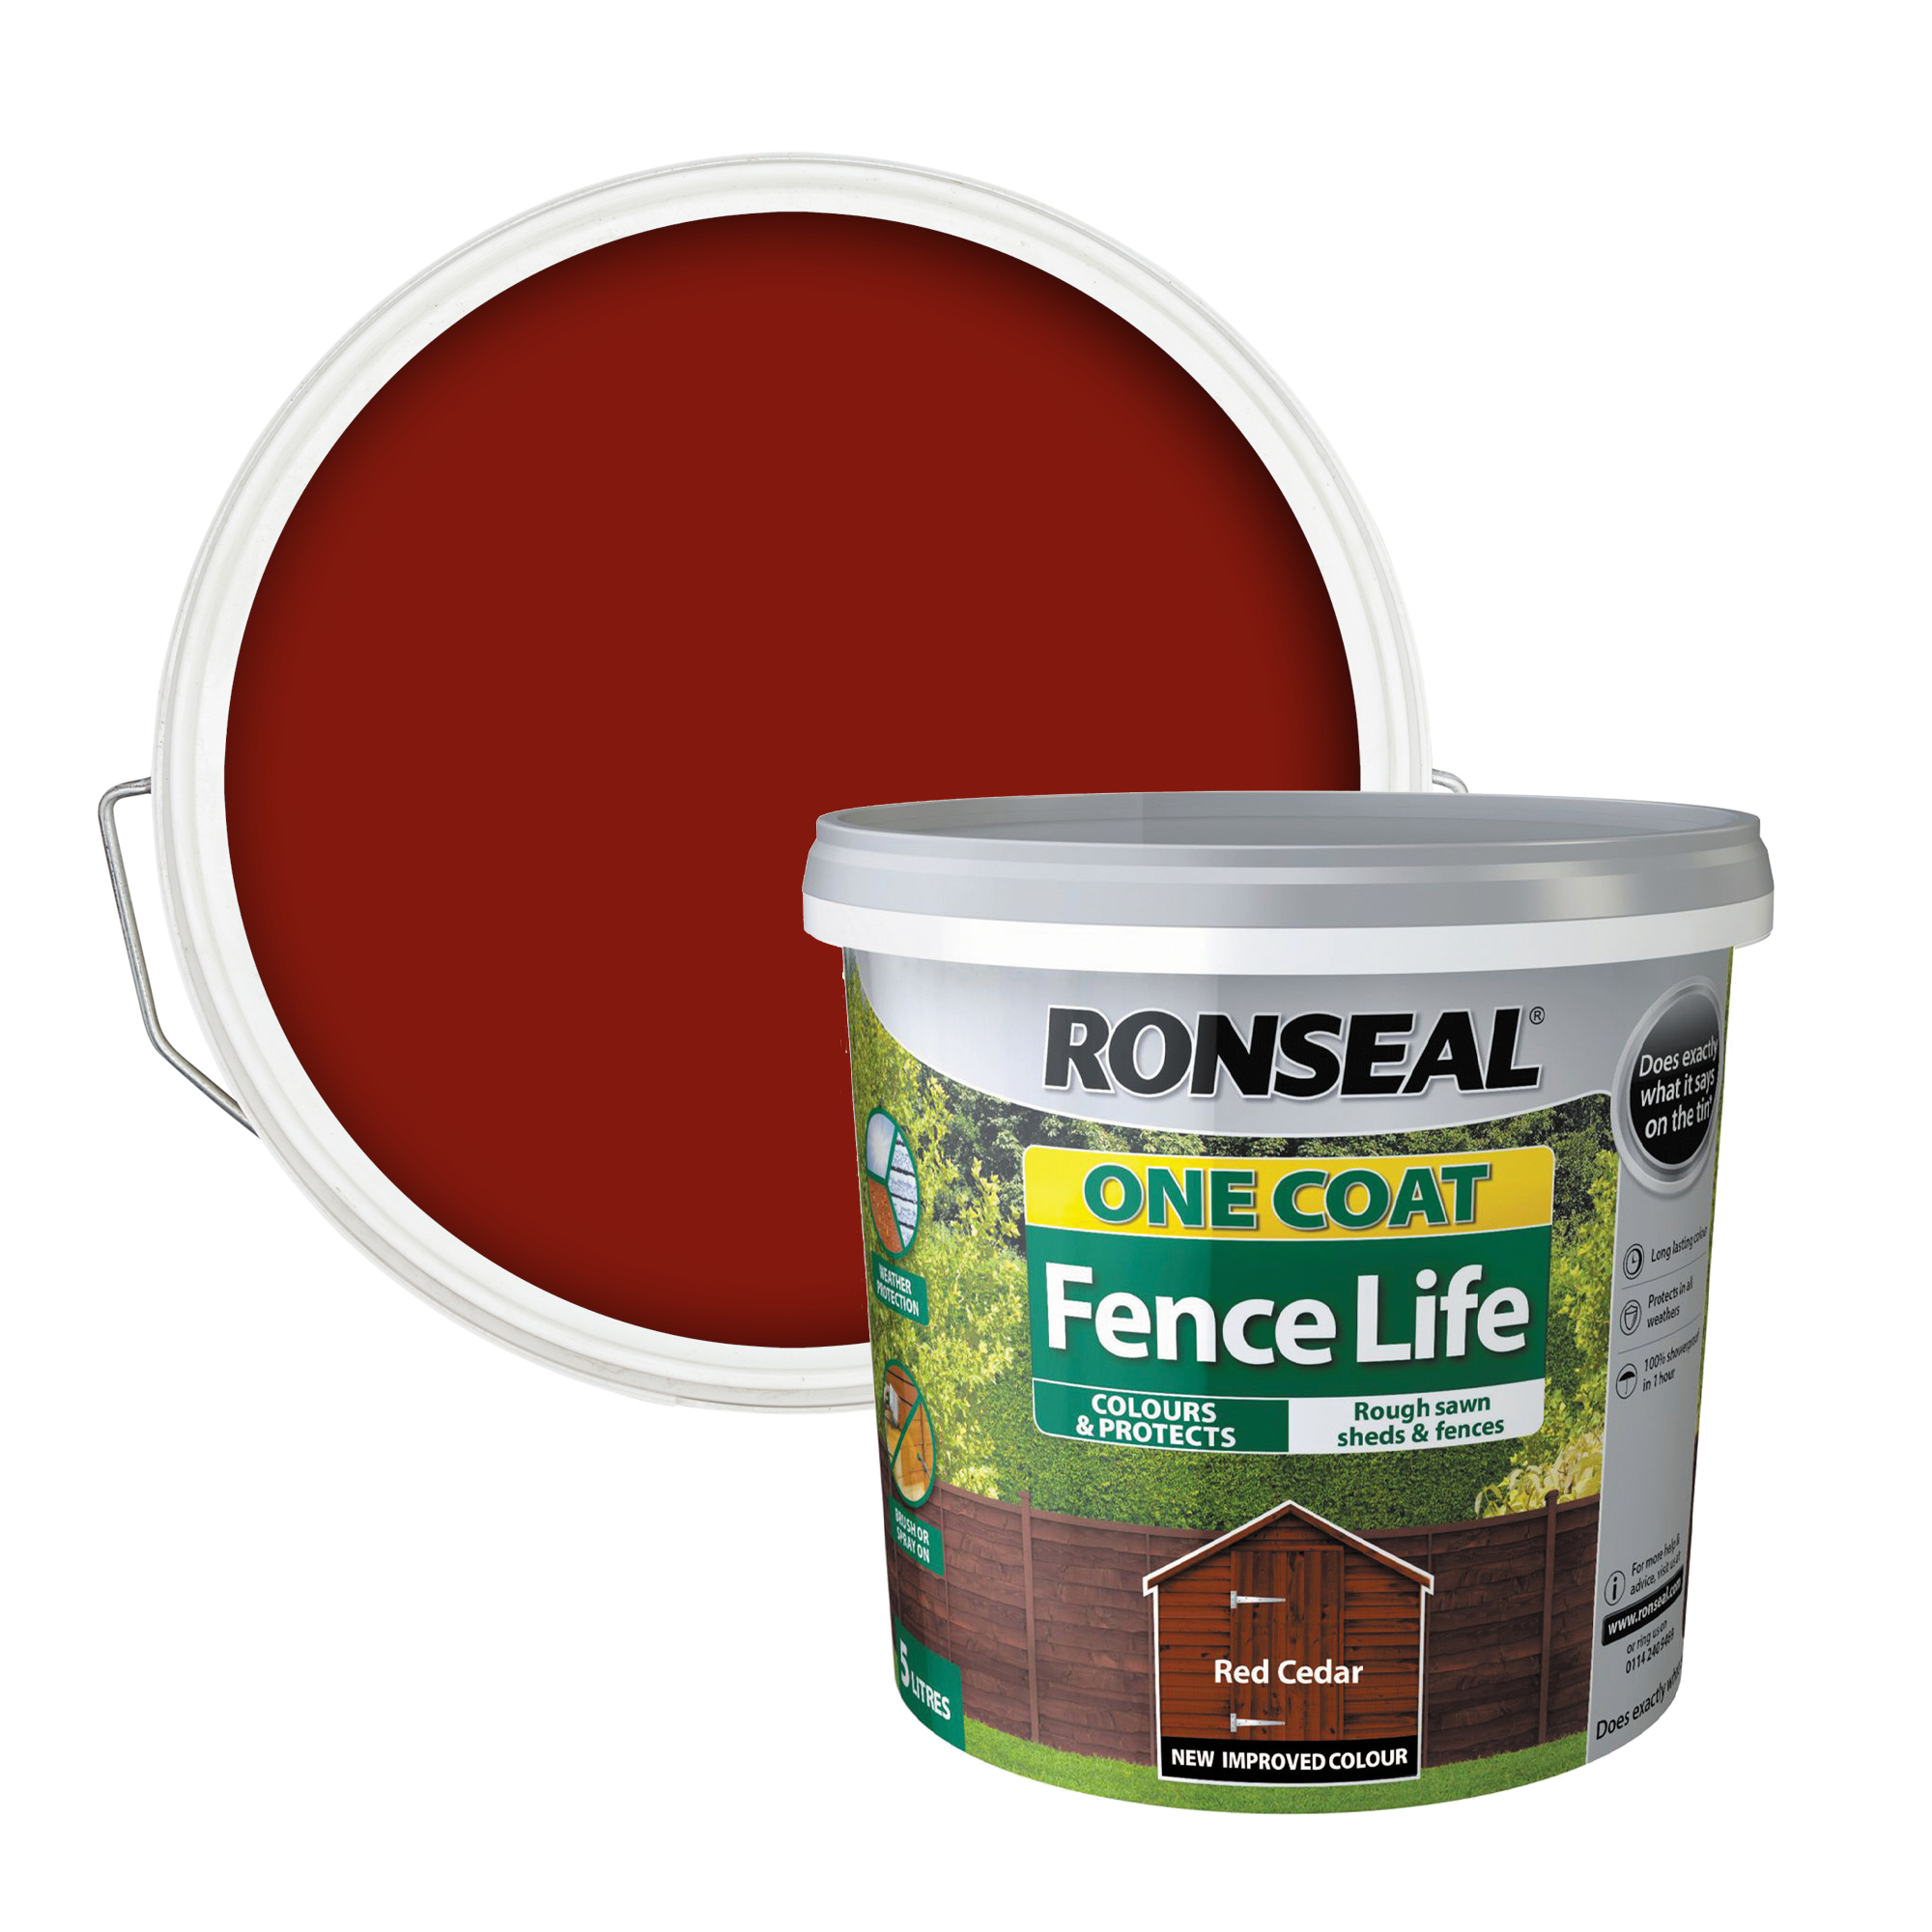 Ronseal One Coat Fence Life Red Cedar Exterior Wood Paint 5L Image 1